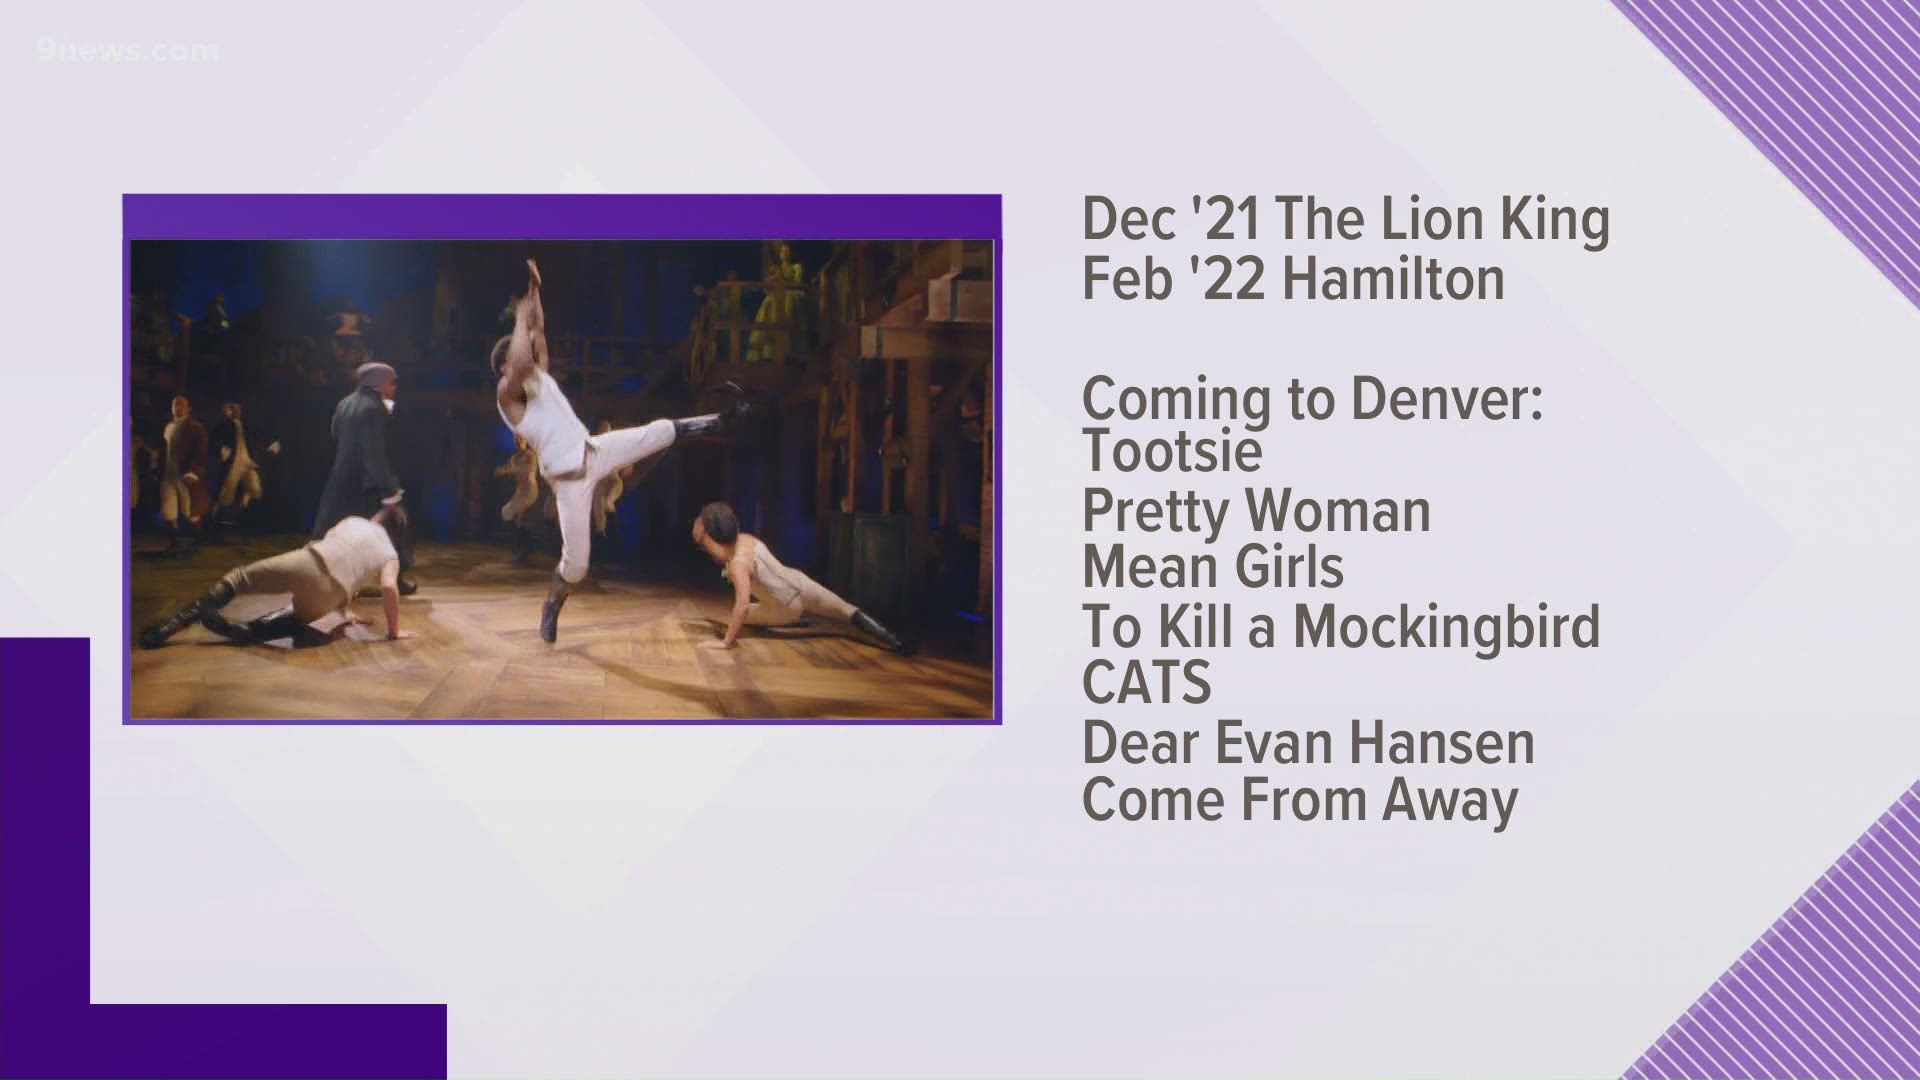 Some of the biggest shows that have already been rescheduled at the Denver Performing Arts Center include Disney's Lion King and Hamilton.